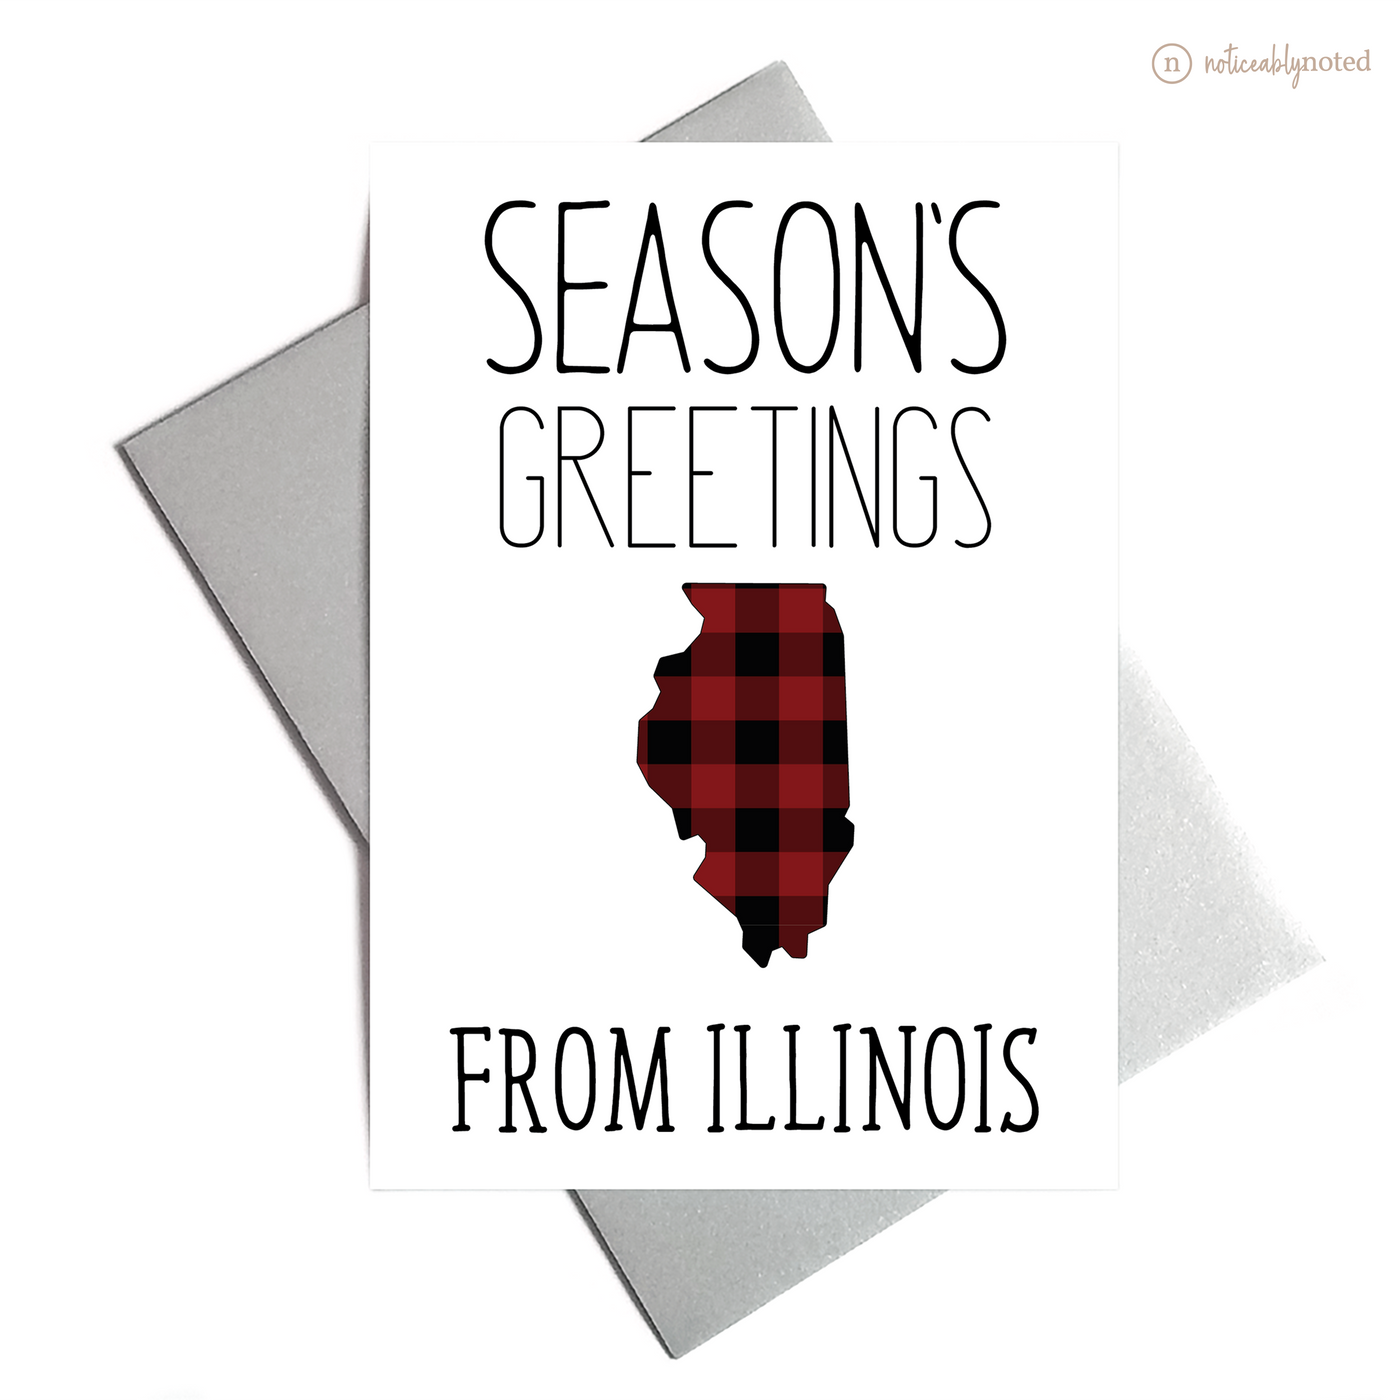 Illinois Christmas Cards | Noticeably Noted